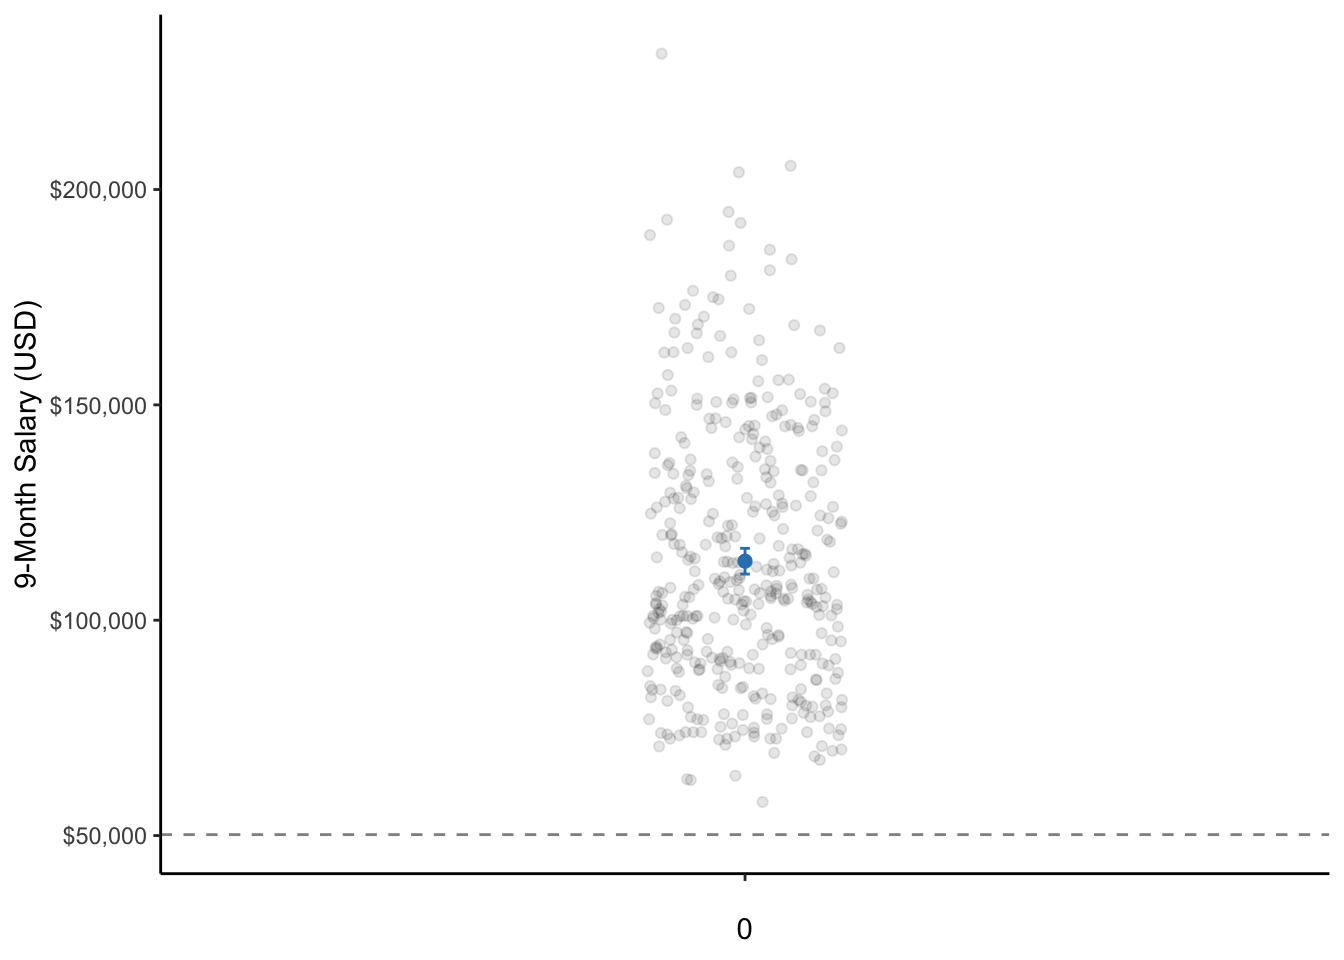 A dot plot of the salary of professors where the dot is the mean salary of professors and the whiskers are the 95% CI.
Note: The data points are actually only on a single line on the x-axis. They are only jittered (dispersed) for easier visualization of all data points.